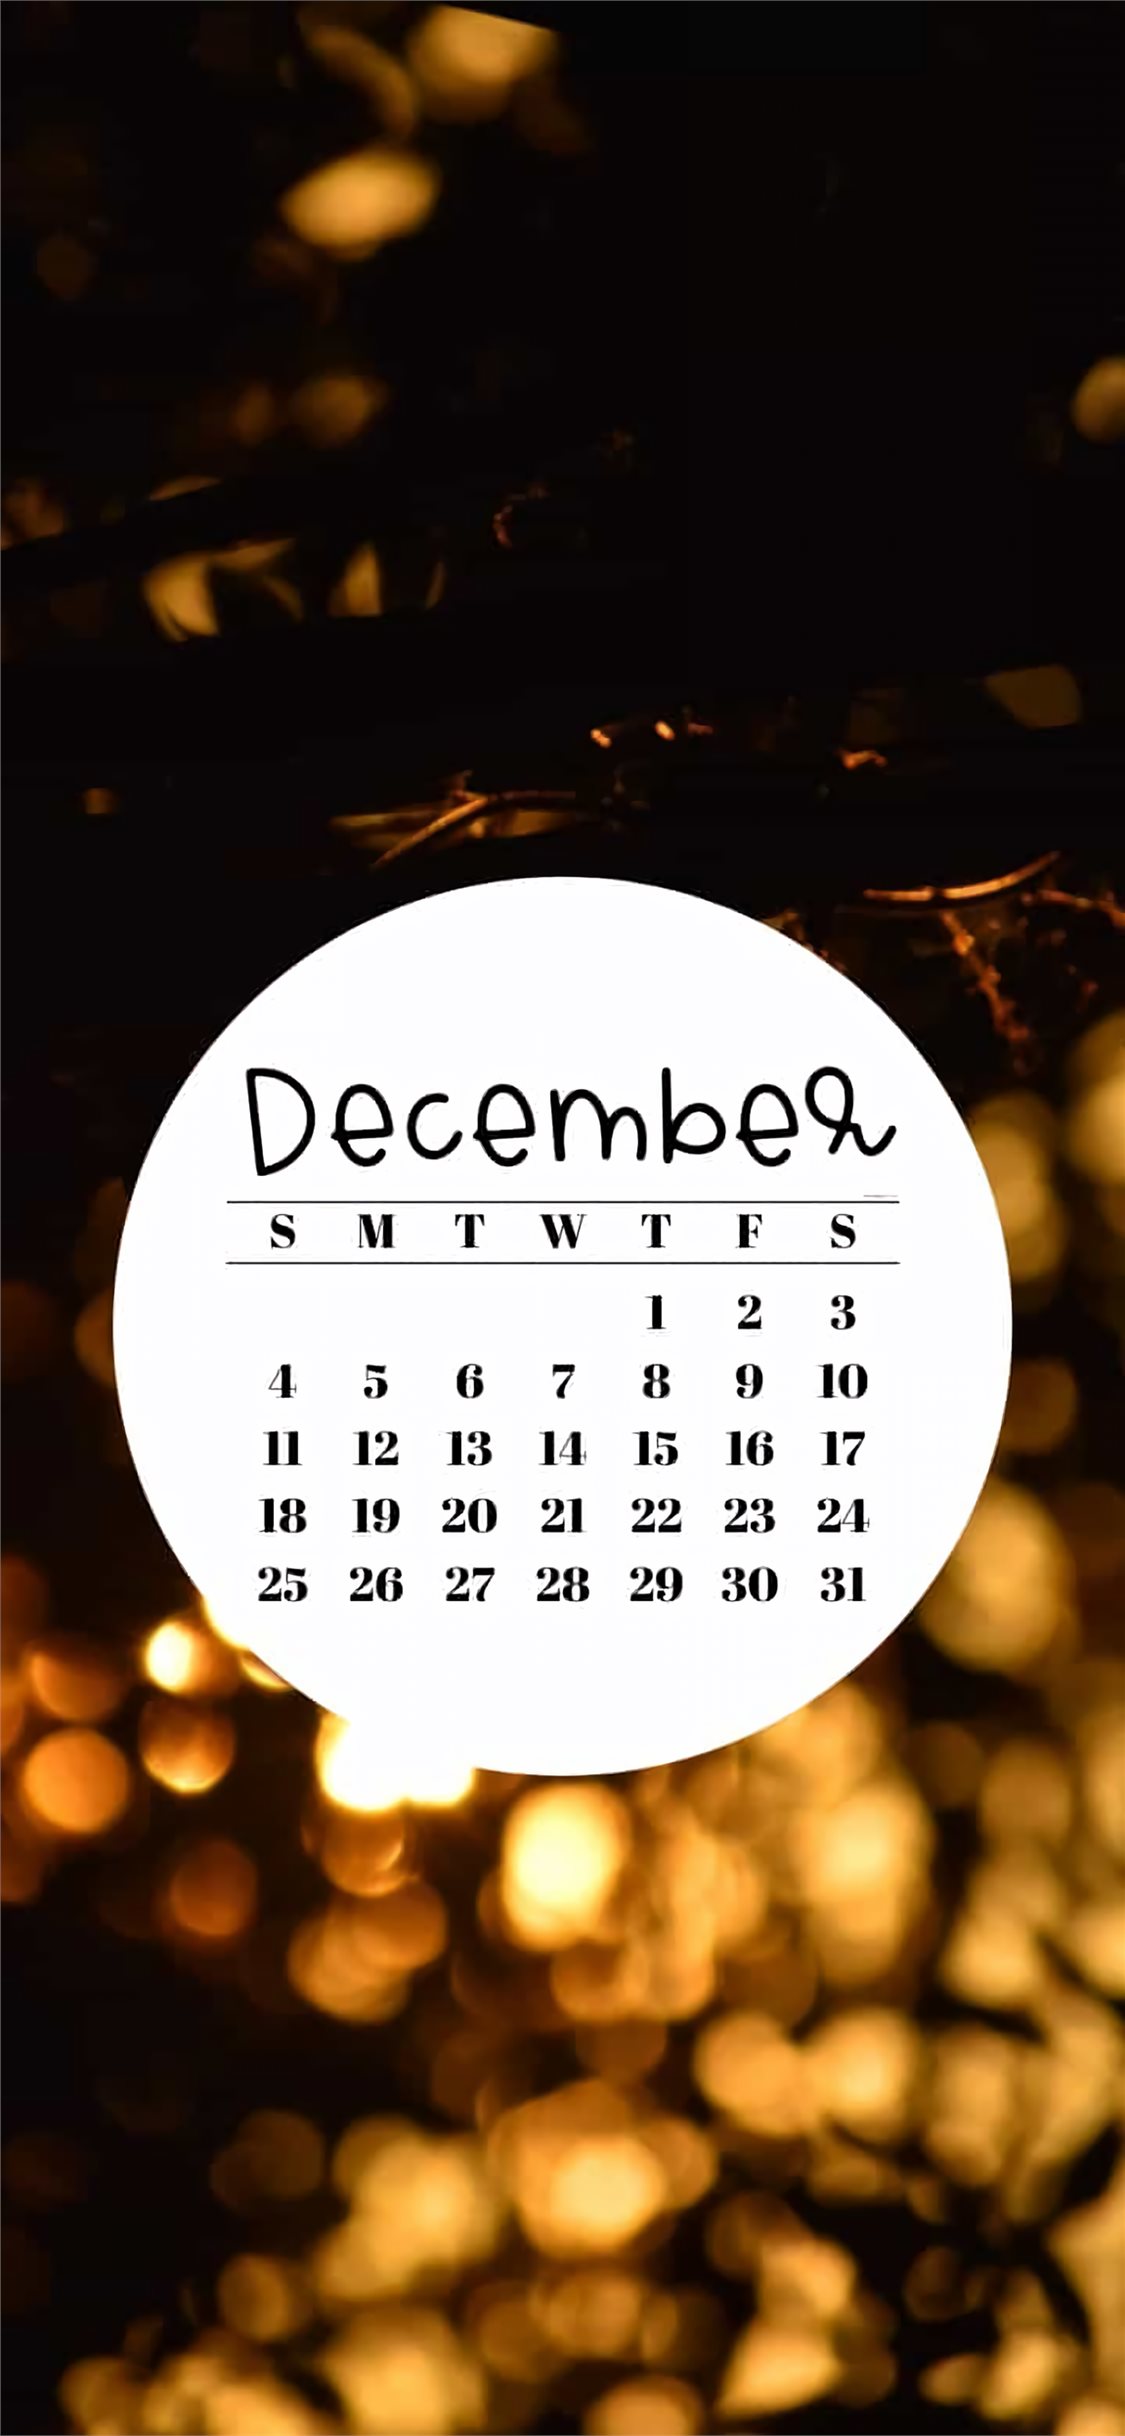 How To Make A Personalized Calendar Wallpaper For Your IPhone  GetNotifyR